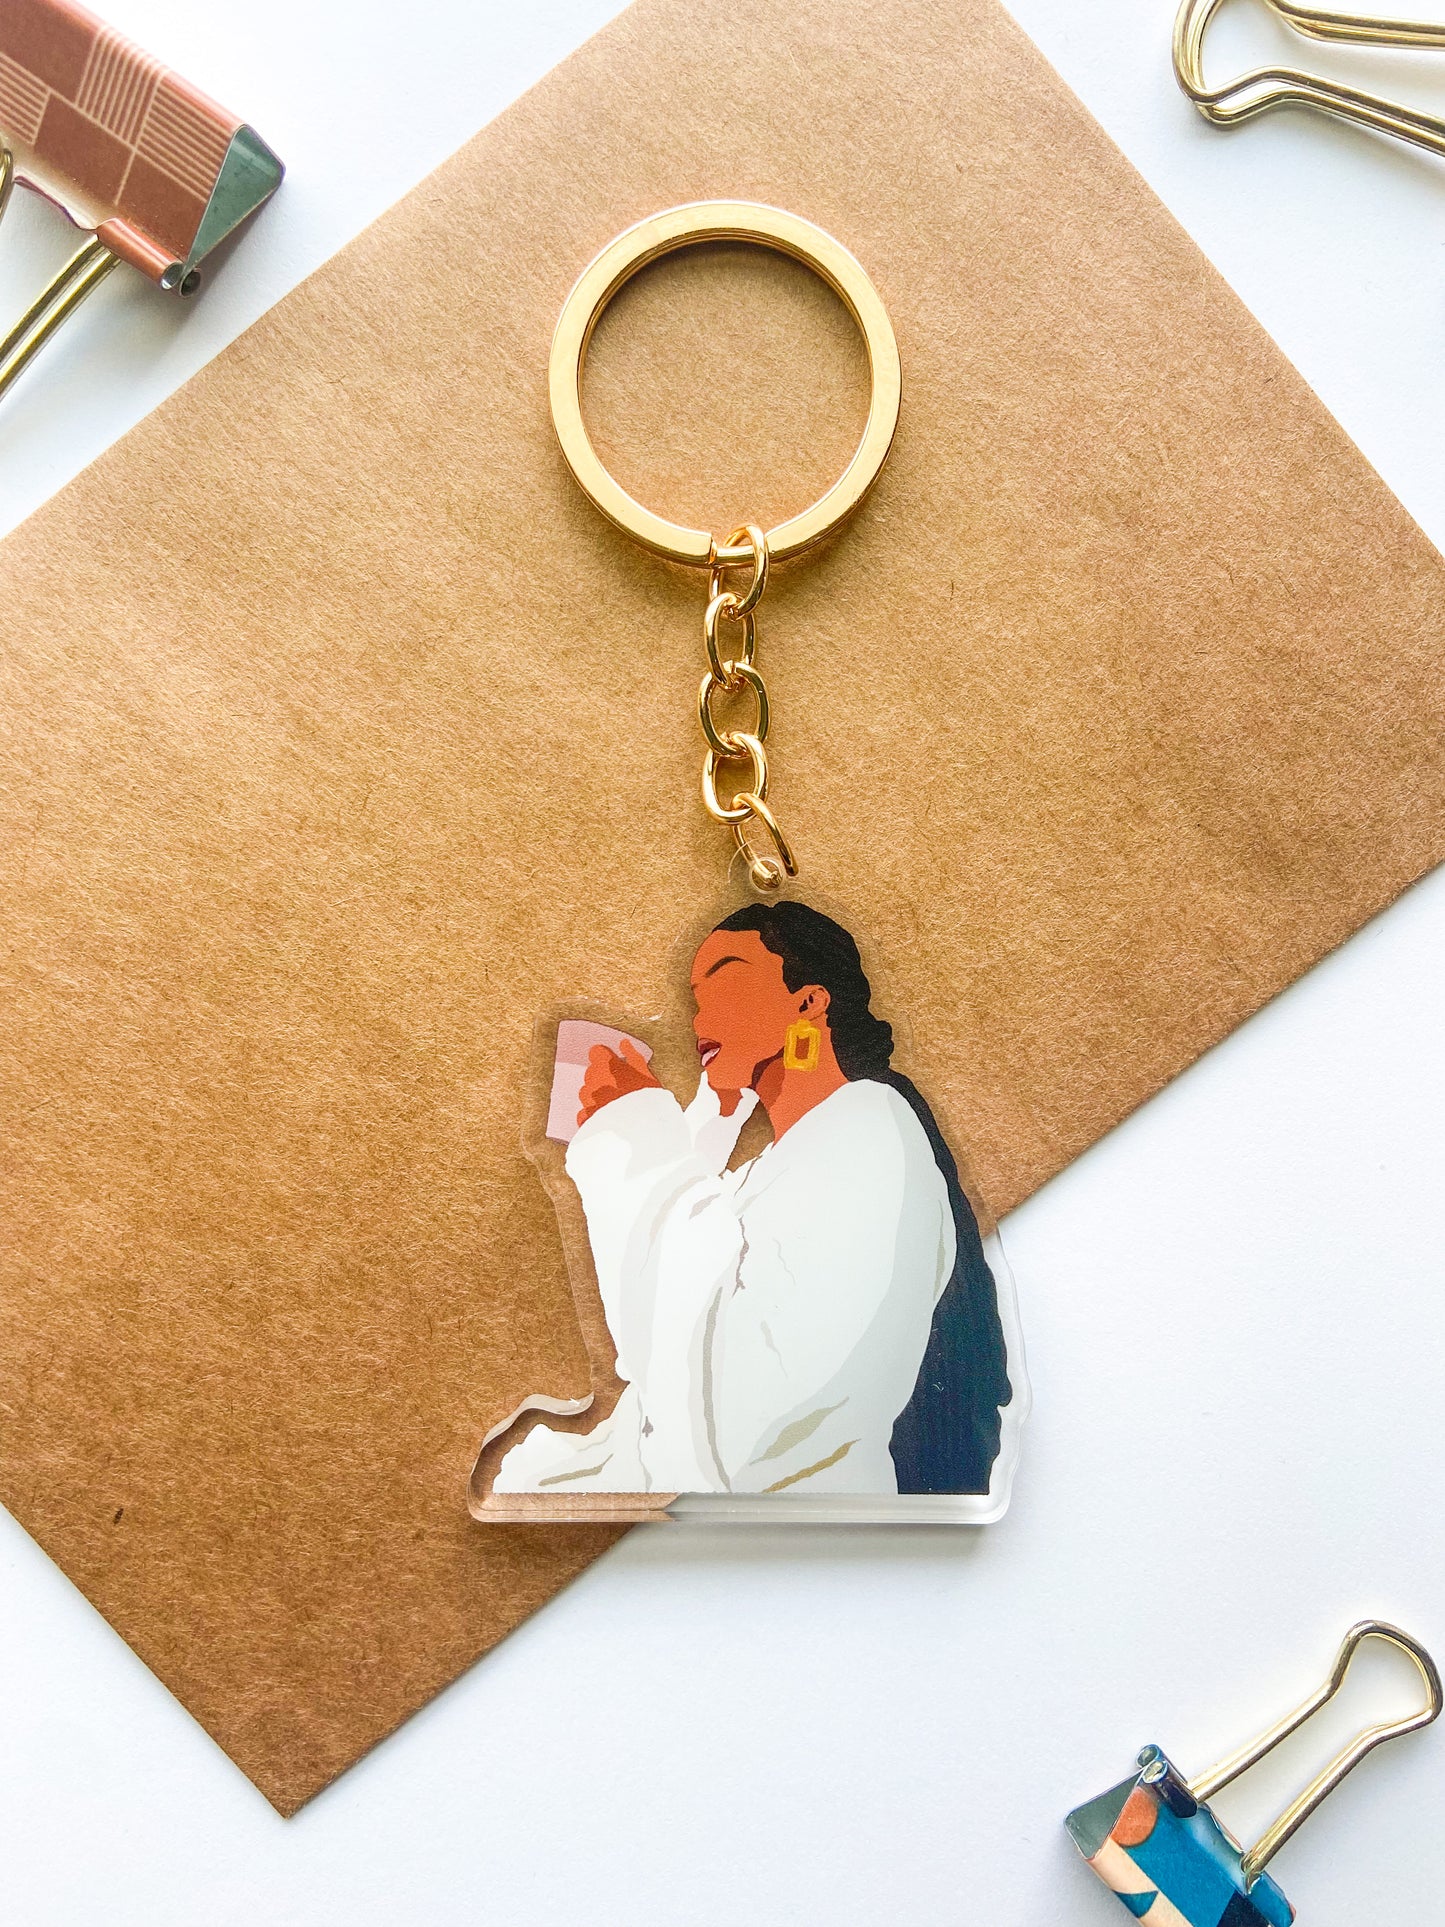 "At Peace" Illustrated Acrylic Keychain